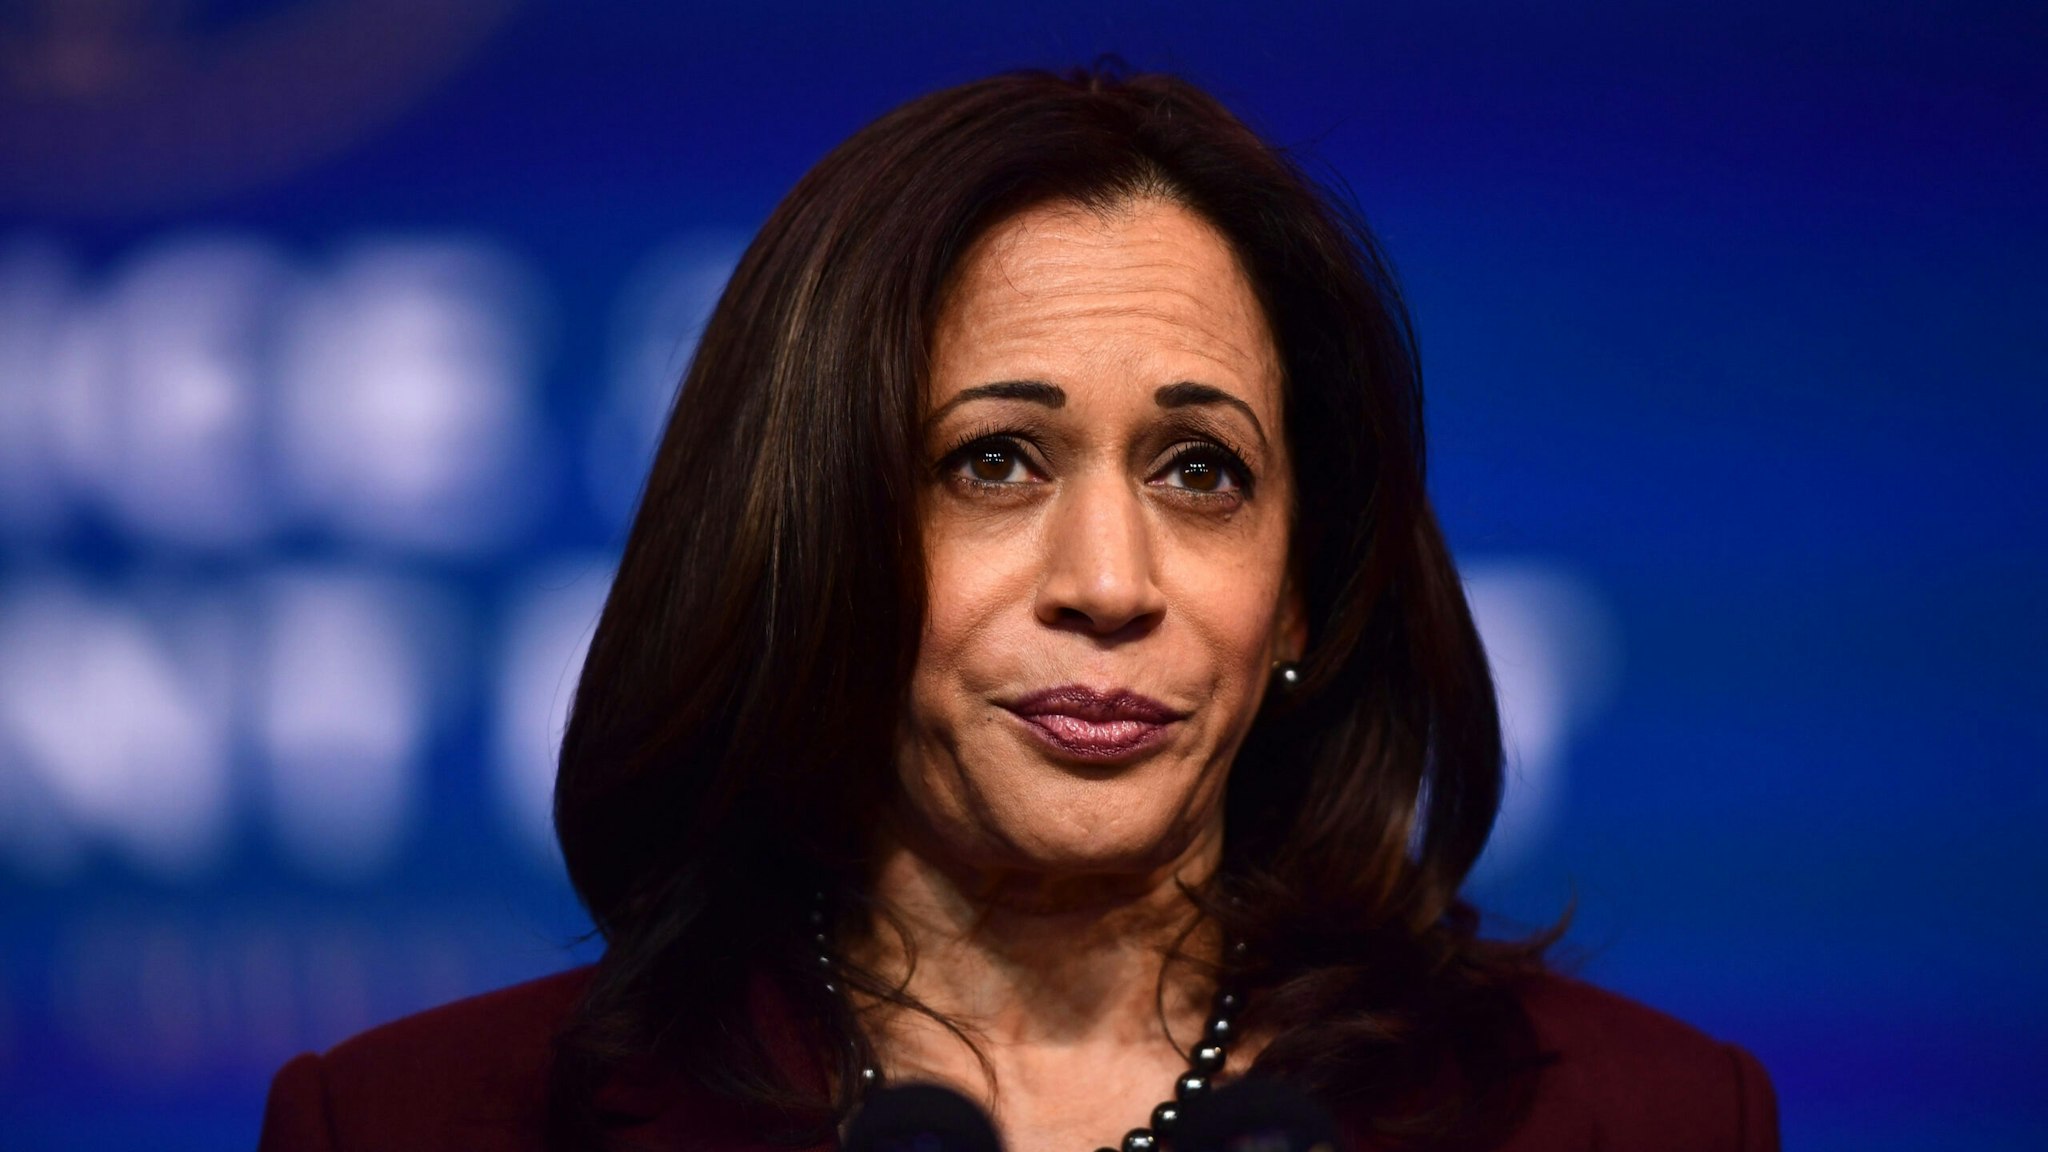 WILMINGTON, DE - NOVEMBER 24:  Vice President-elect Kamala Harris speaks after President-elect Joe Biden introduced key foreign policy and national security nominees and appointments at the Queen Theatre on November 24, 2020 in Wilmington, Delaware. As President-elect Biden waits to receive official national security briefings, he is announcing the names of top members of his national security team to the public. Calls continue for President Trump to concede the election as the transition proceeds.